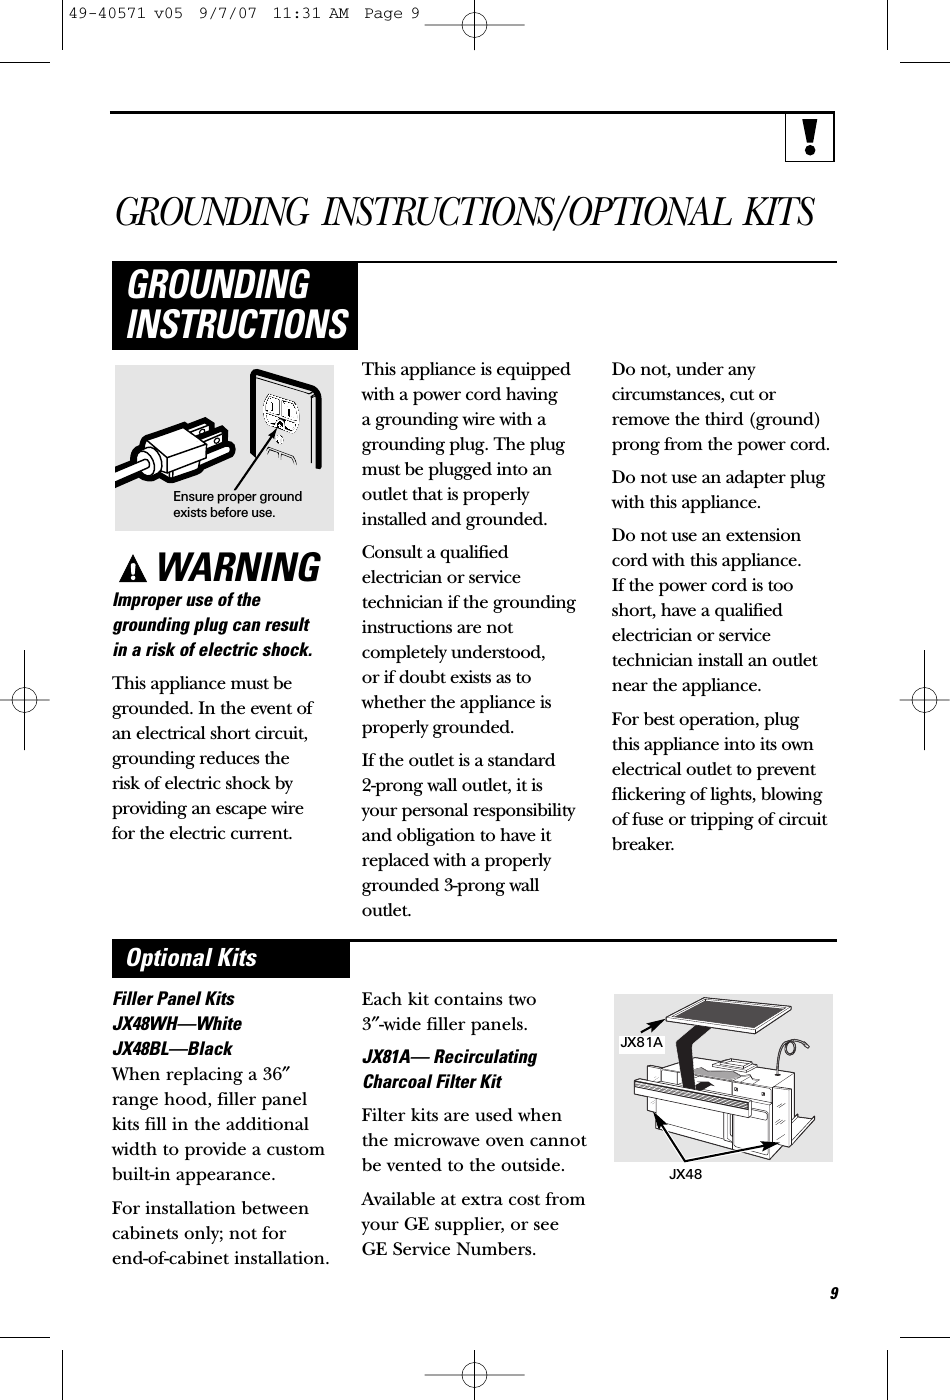 GROUNDING INSTRUCTIONS/OPTIONAL KITSWARNINGImproper use of thegrounding plug can result in a risk of electric shock.This appliance must begrounded. In the event of an electrical short circuit,grounding reduces the risk of electric shock byproviding an escape wire for the electric current. This appliance is equippedwith a power cord having a grounding wire with agrounding plug. The plugmust be plugged into anoutlet that is properlyinstalled and grounded.Consult a qualified electrician or servicetechnician if the groundinginstructions are notcompletely understood, or if doubt exists as towhether the appliance isproperly grounded.If the outlet is a standard 2-prong wall outlet, it is your personal responsibilityand obligation to have itreplaced with a properlygrounded 3-prong walloutlet.Do not, under anycircumstances, cut orremove the third (ground)prong from the power cord.Do not use an adapter plugwith this appliance.Do not use an extensioncord with this appliance. If the power cord is tooshort, have a qualifiedelectrician or servicetechnician install an outletnear the appliance.For best operation, plug this appliance into its ownelectrical outlet to preventflickering of lights, blowingof fuse or tripping of circuitbreaker.GROUNDINGINSTRUCTIONSEnsure proper groundexists before use.9Filler Panel KitsJX48WH—WhiteJX48BL—BlackWhen replacing a 36″range hood, filler panelkits fill in the additionalwidth to provide a custom built-in appearance. For installation betweencabinets only; not for end-of-cabinet installation.Each kit contains two 3″-wide filler panels.JX81A— RecirculatingCharcoal Filter KitFilter kits are used whenthe microwave oven cannotbe vented to the outside.Available at extra cost fromyour GE supplier, or seeGE Service Numbers.Optional KitsJX81AJX4849-40571 v05  9/7/07  11:31 AM  Page 9